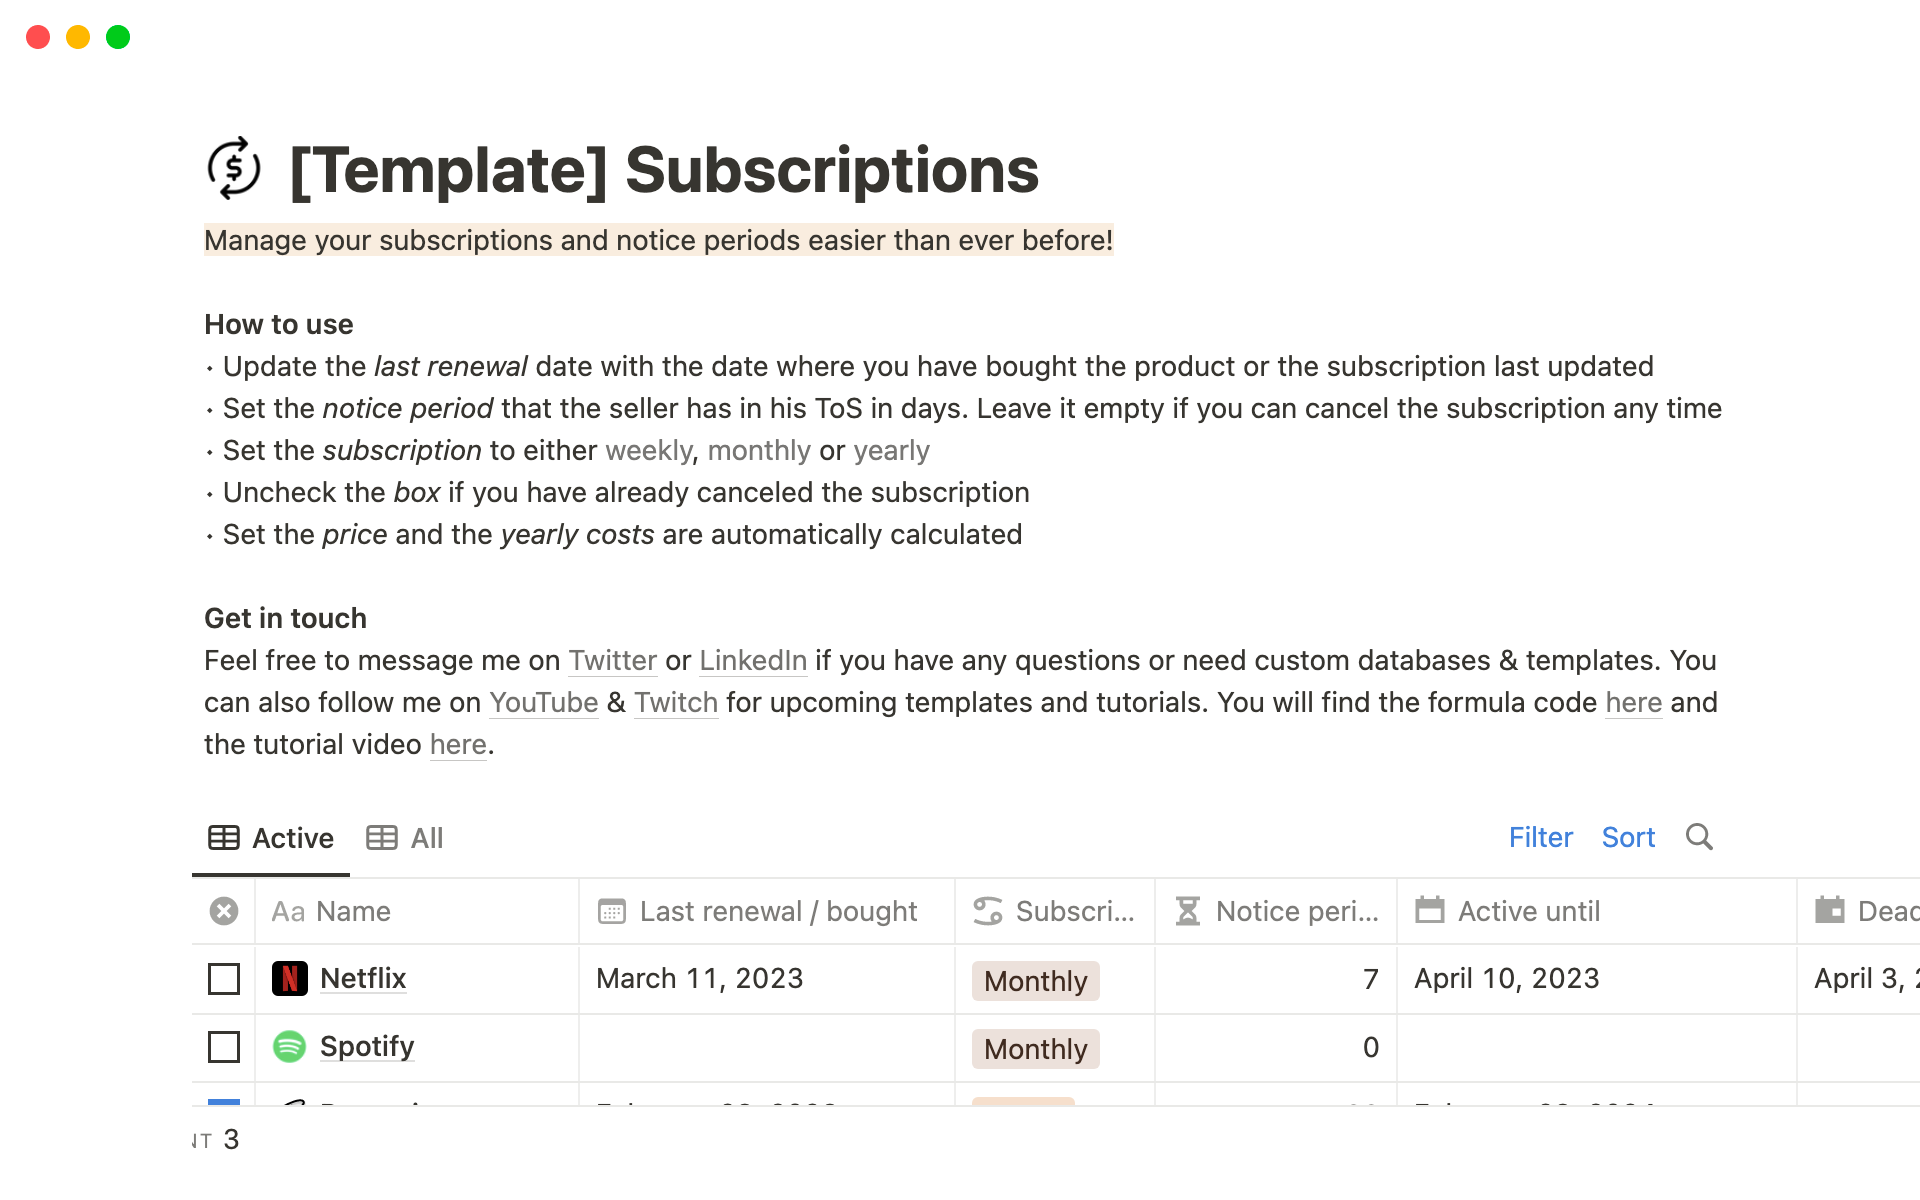 Manage your subscriptions and notice periods easier than ever before!